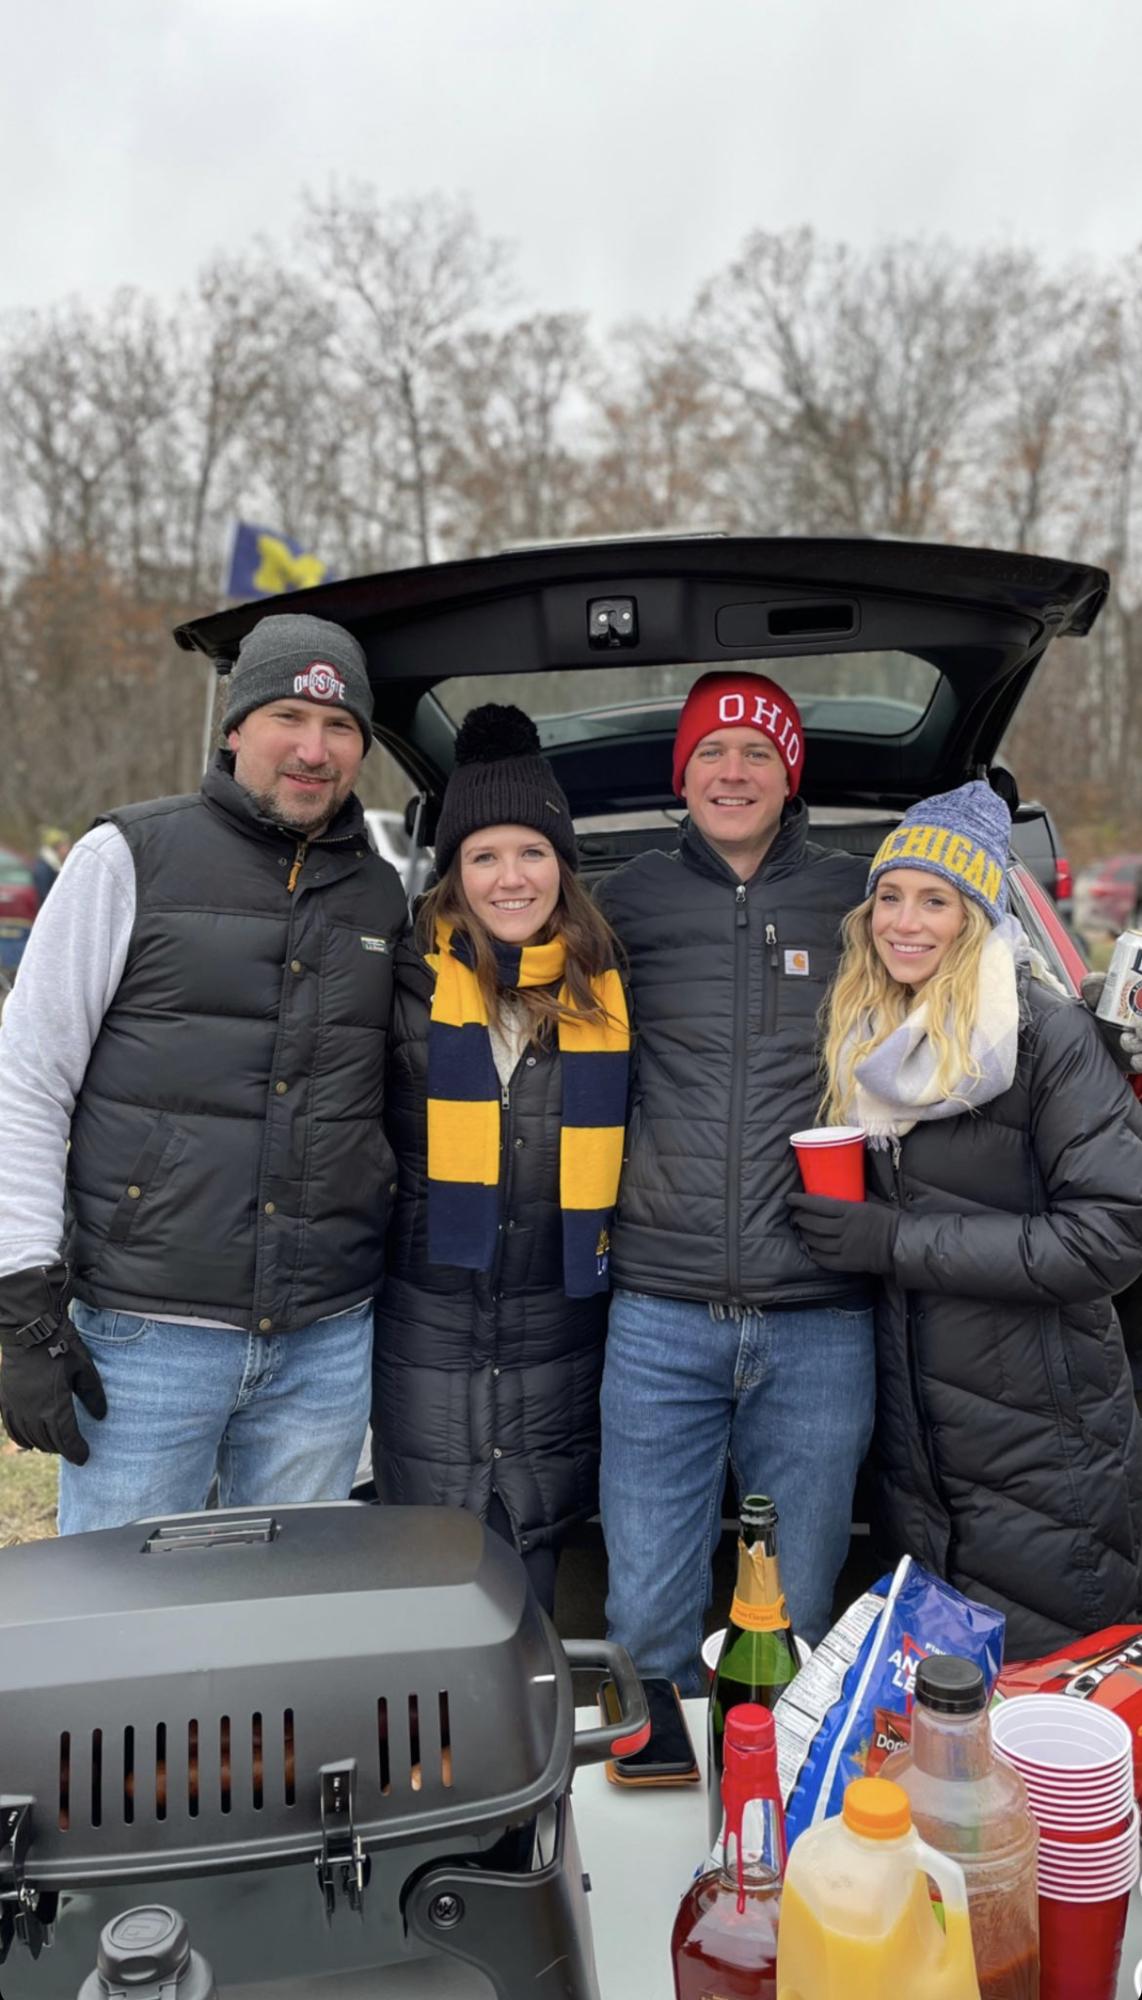 Our first OSU Michigan game together! Awesome but extremely cold tailgate with Rachel Hampton and Elliot Bromagen - November 2021 in Ann Arbor, MI (Michigan won!)